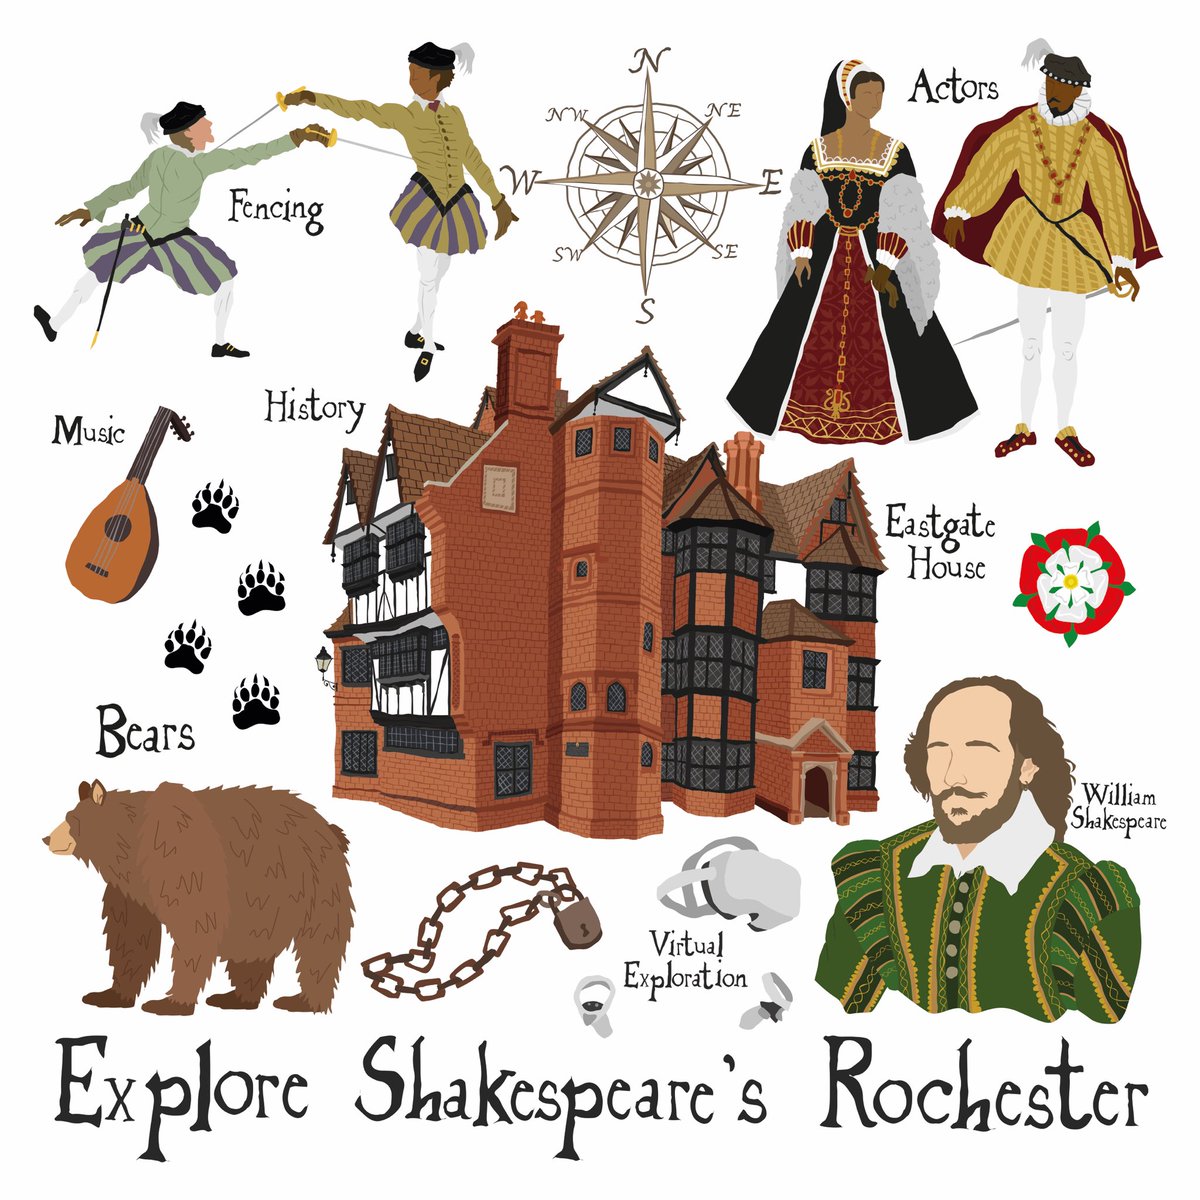 Are you free Tuesday?
Head down to the Historic Rochester and see live performances, hear some Tudor music and learn about bears in Rochester!

#designedbyesther #medway #rochester @archaeobears @EastgateHouse @creativemedway @VisitKent